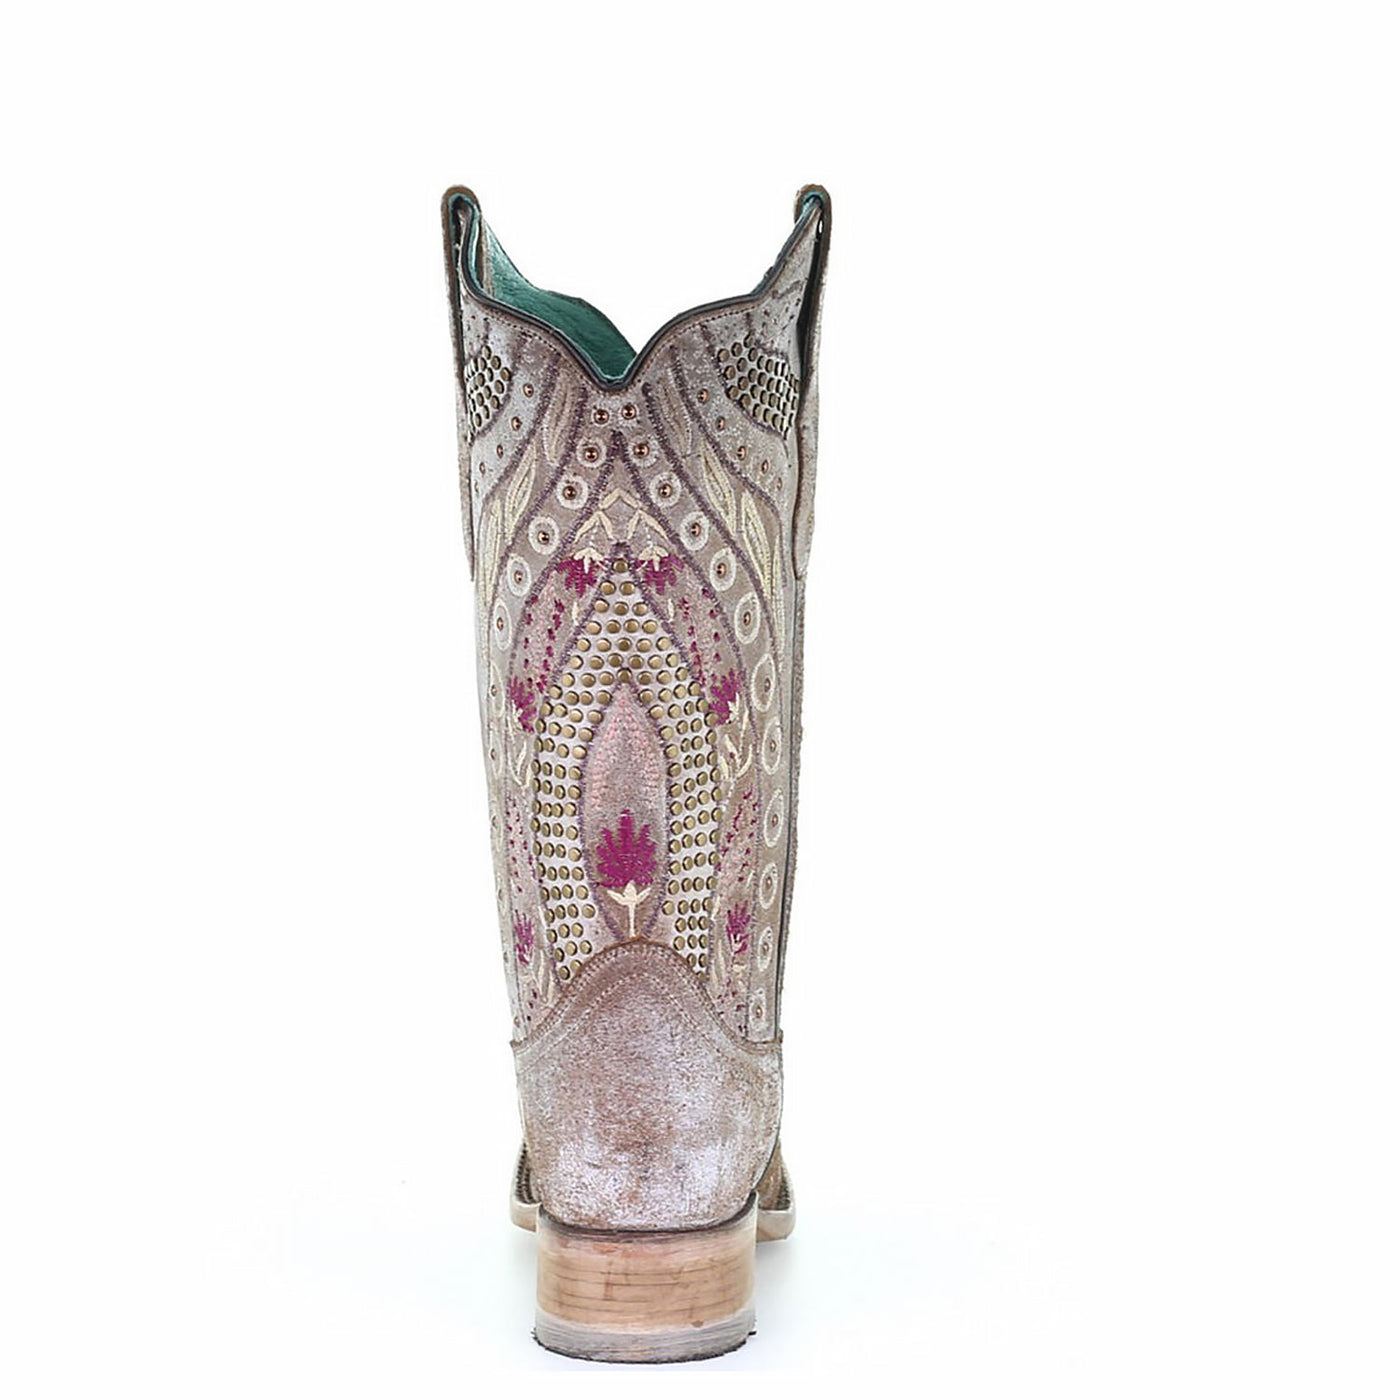 Corral | Studs & Flowered Embroidery & Crystals SQ. Toe | Taupe - Outback Traders Australia